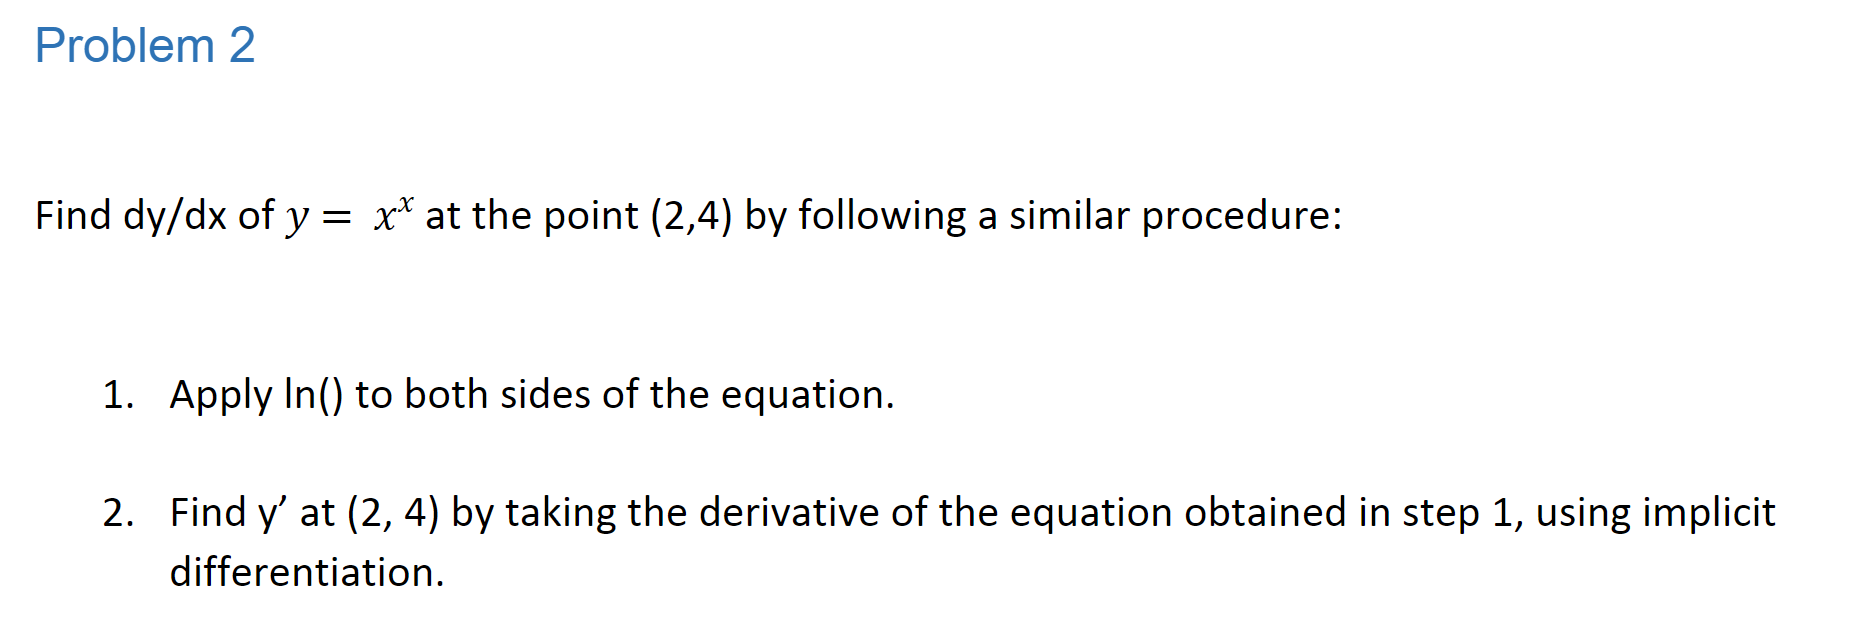 Problem 2
Find dy/dx of y = x* at the point (2,4) by following a similar procedure:
1. Apply In() to both sides of the equation
2. Find y' at (2, 4) by taking the derivative of the equation obtained in step 1, using implicit
differentiation
